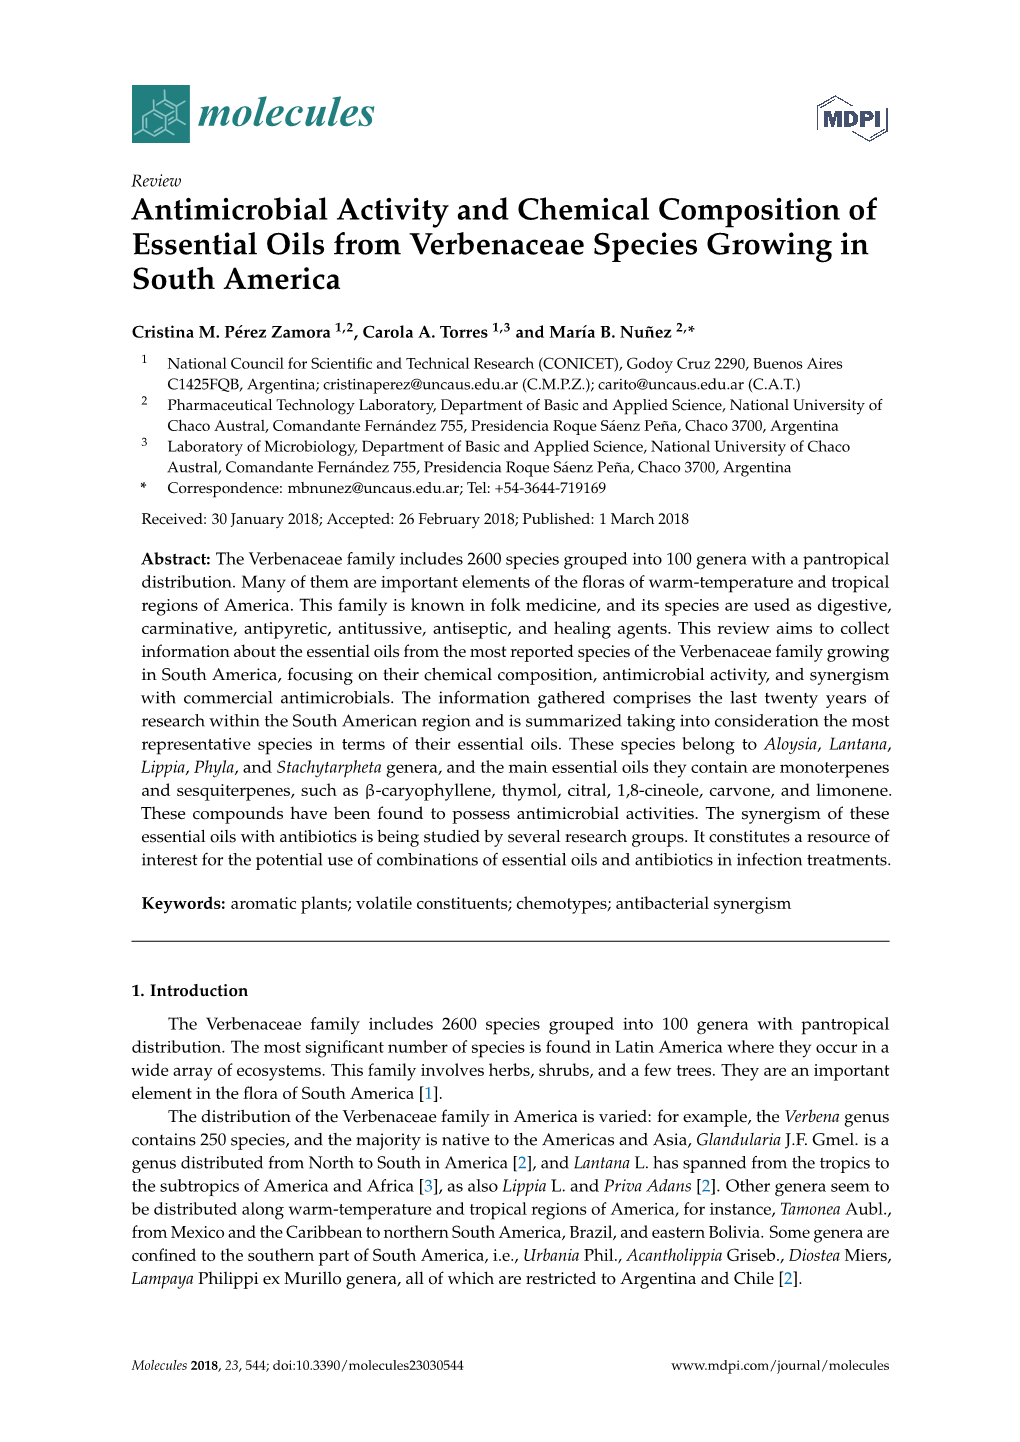 Antimicrobial Activity and Chemical Composition of Essential Oils from Verbenaceae Species Growing in South America